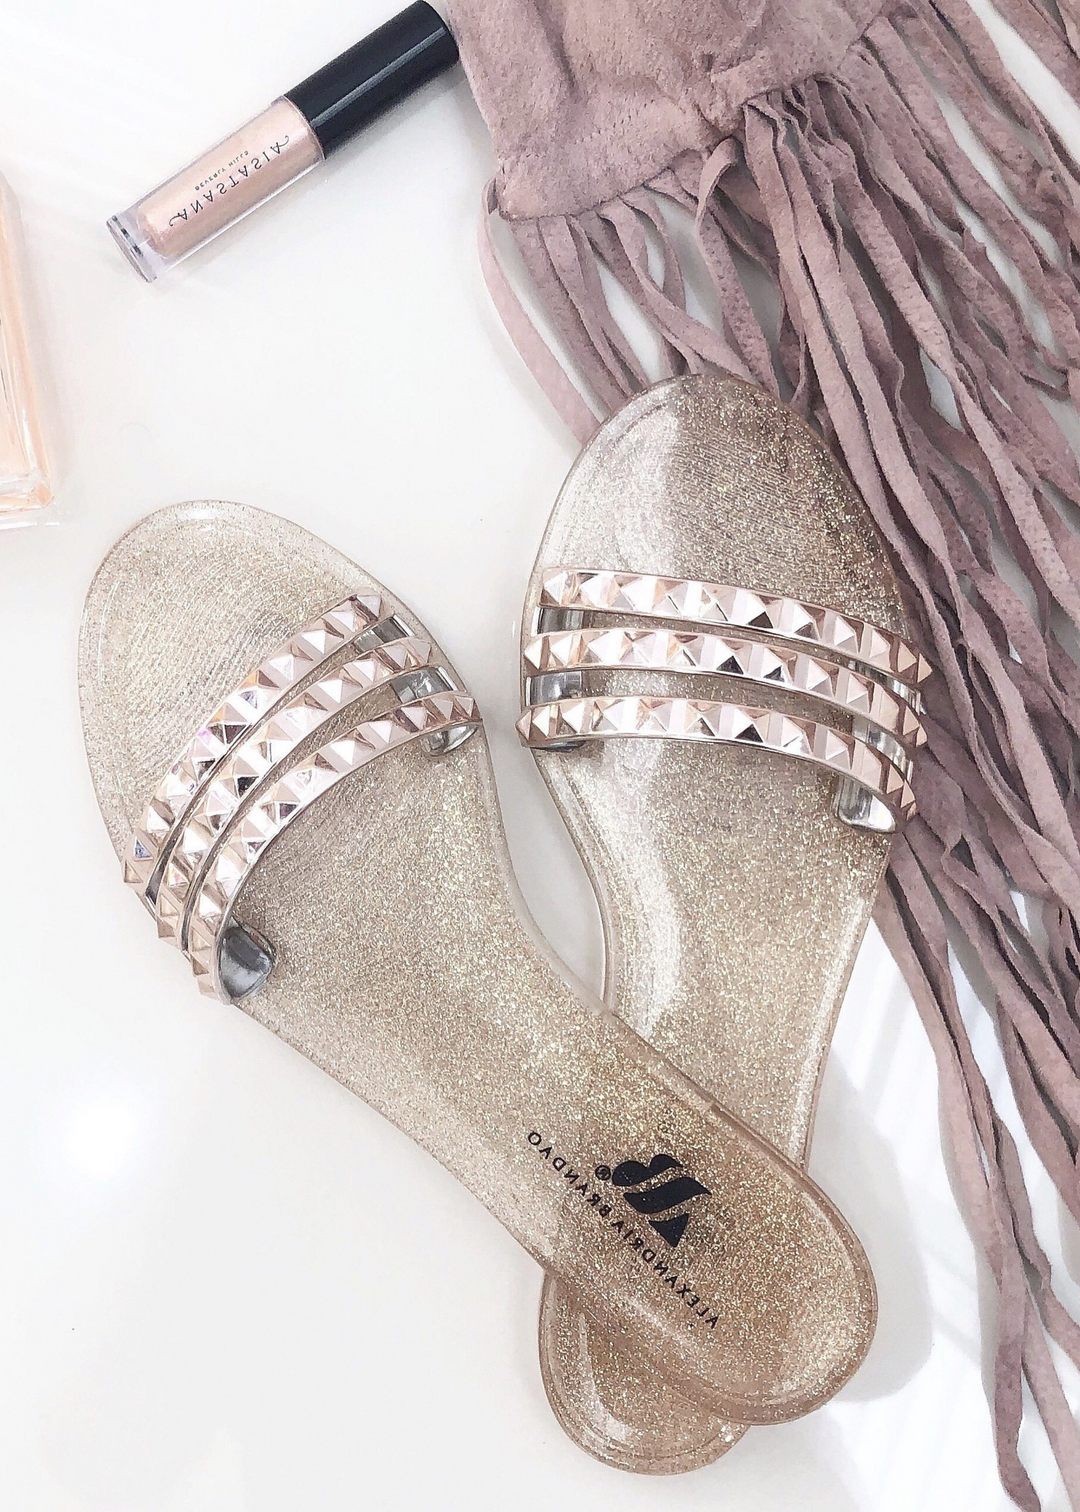 Aria B rose gold jelly sandals.